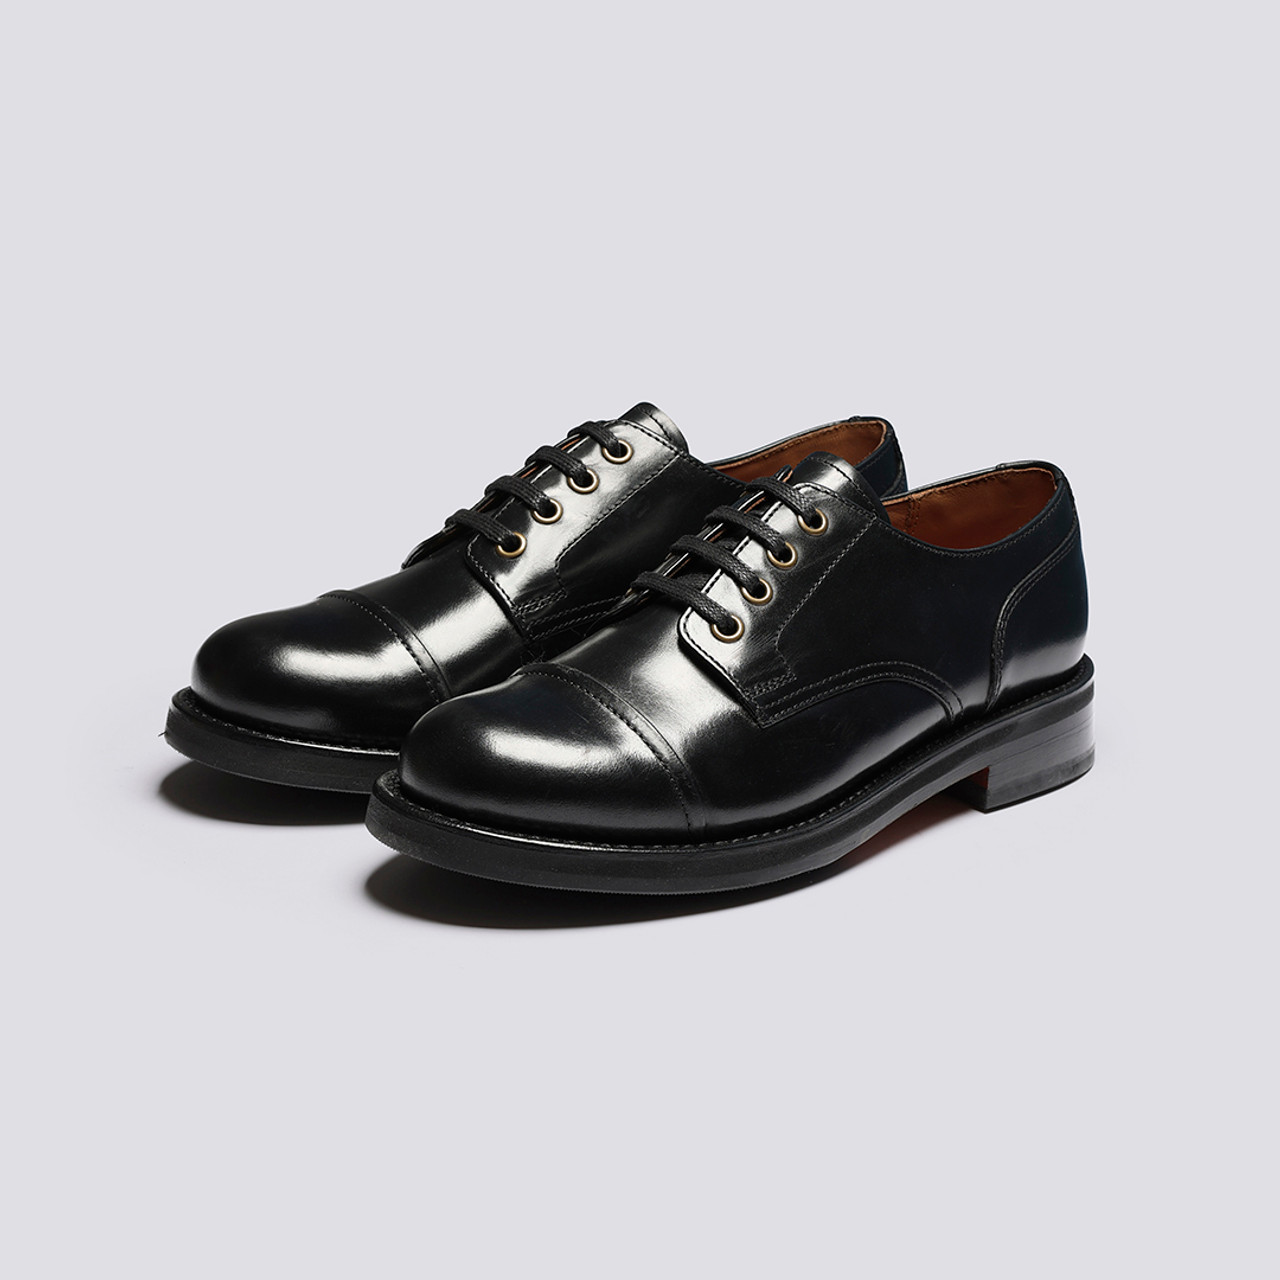 Lara | Womens Derby Shoes in Black Leather | Grenson